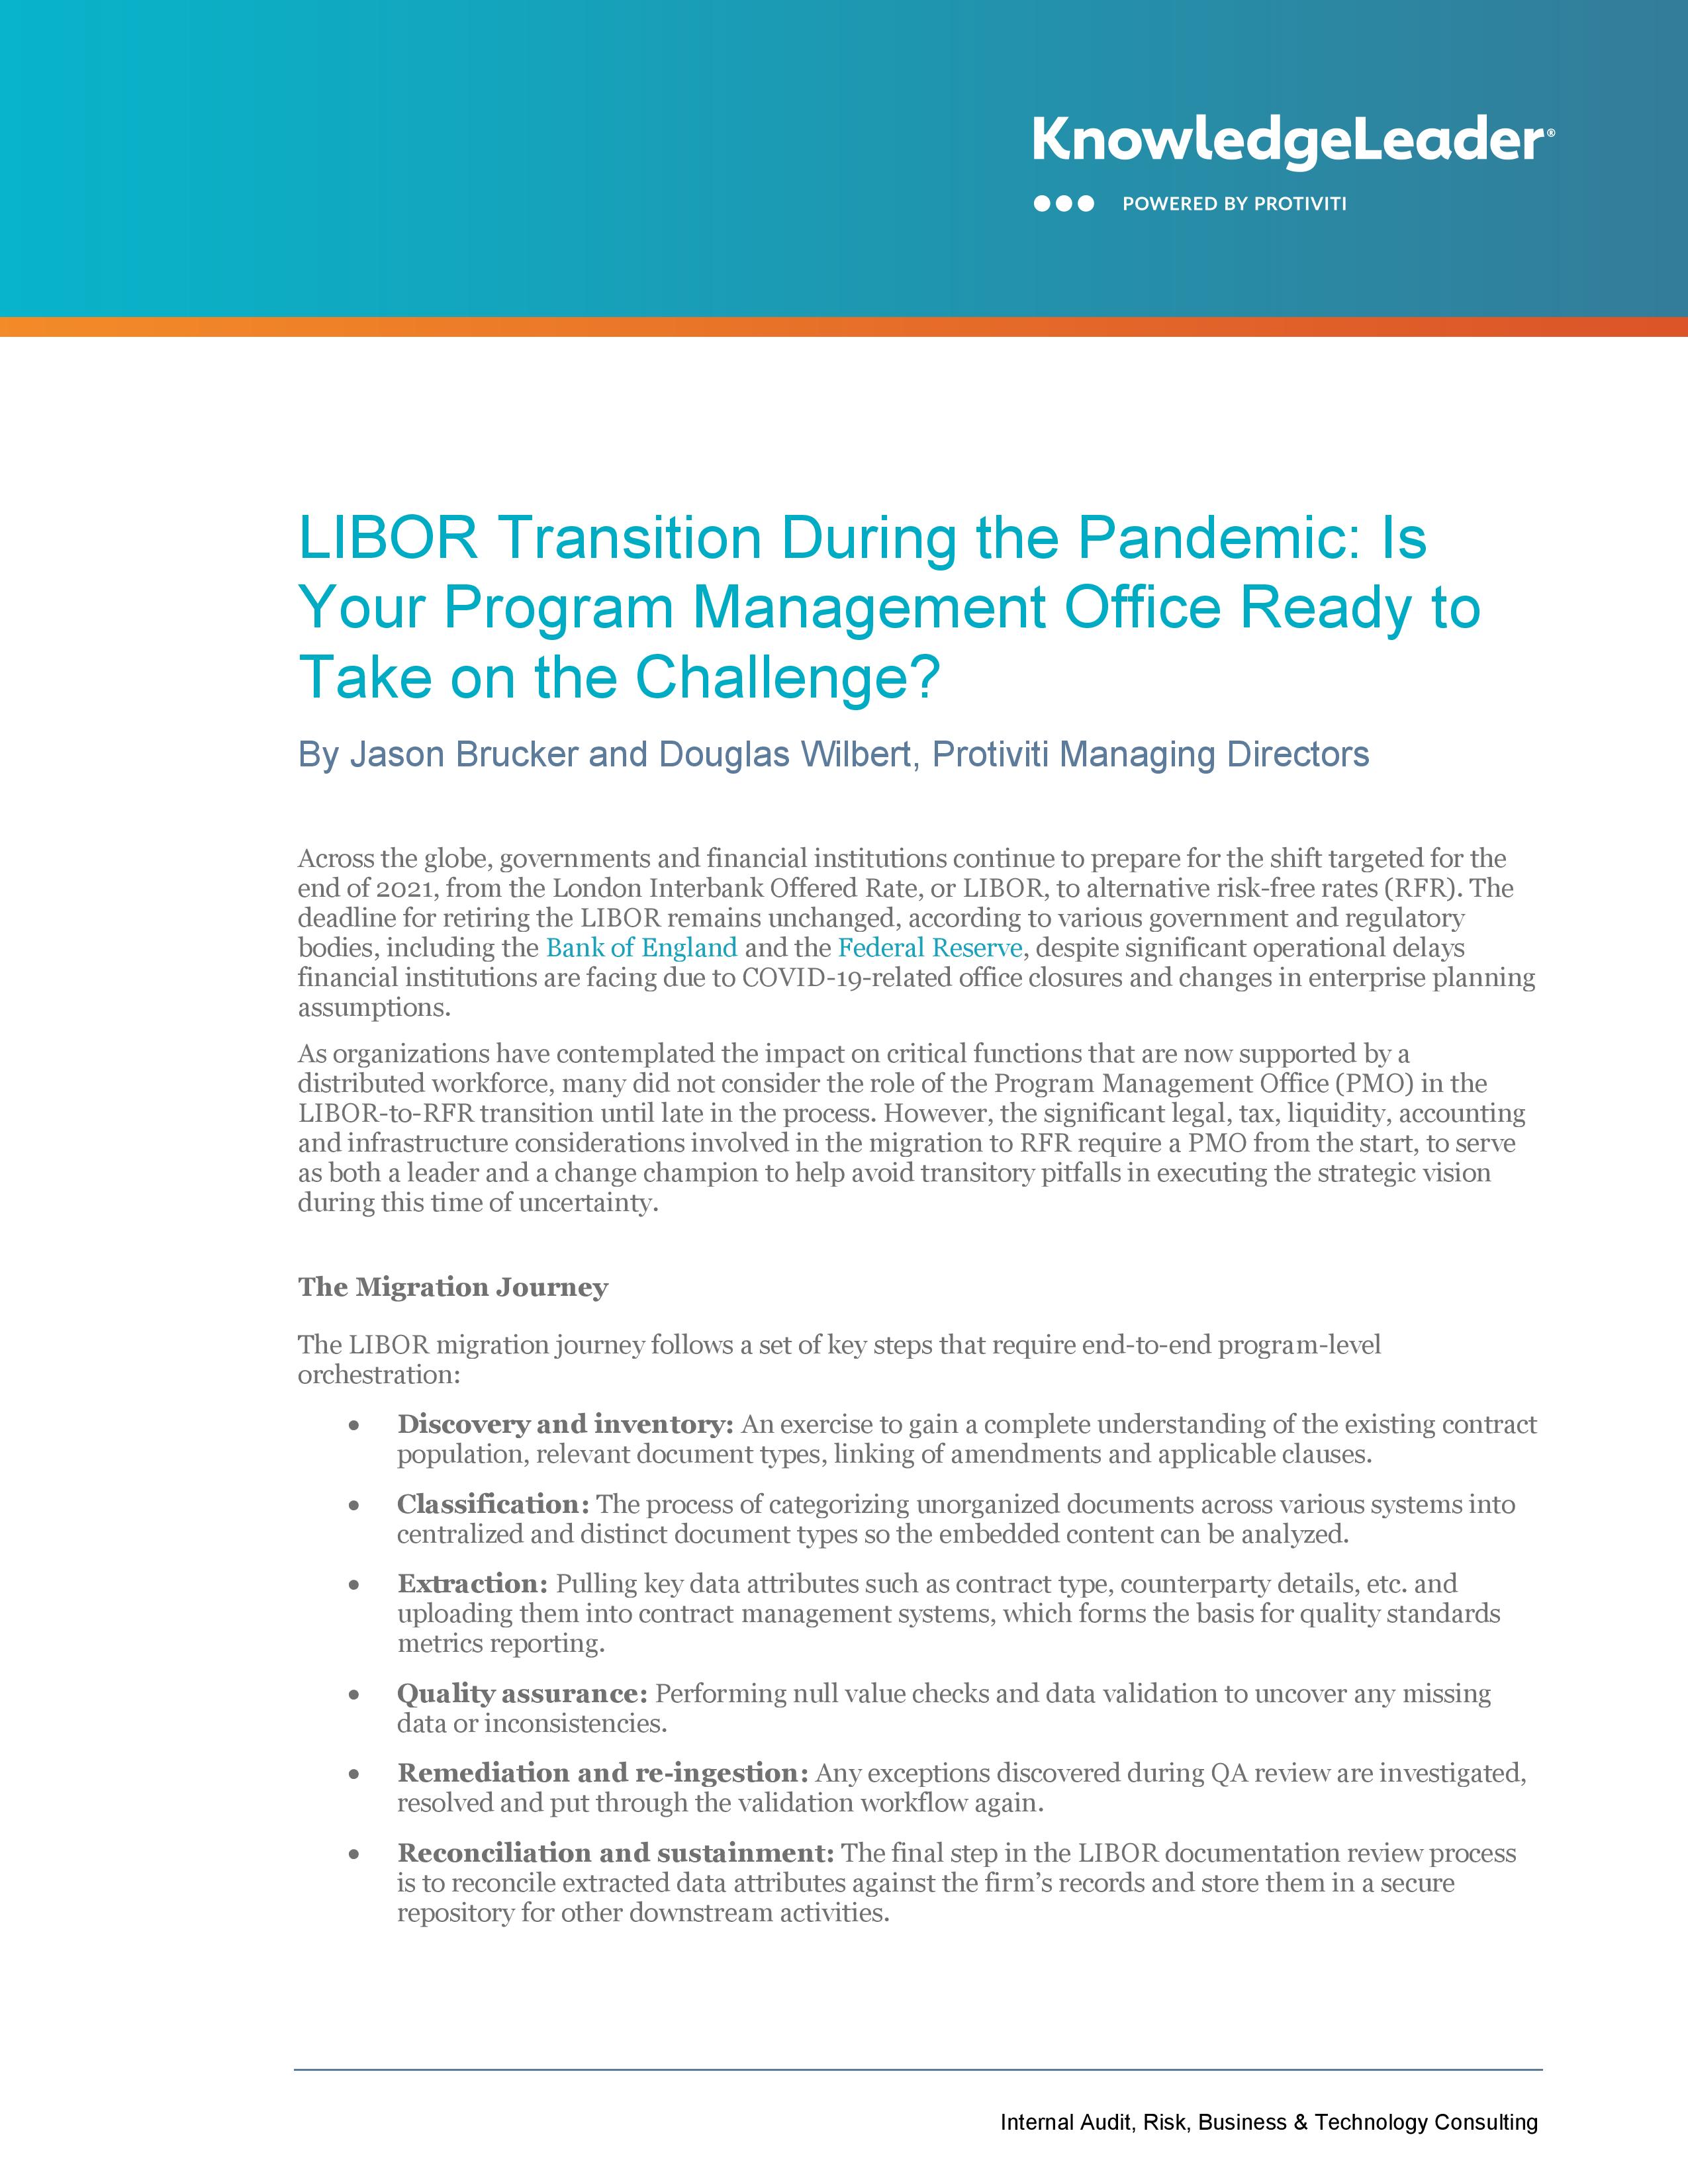 Screenshot of the first page of LIBOR Transition During the Pandemic Is Your Program Management Office Ready